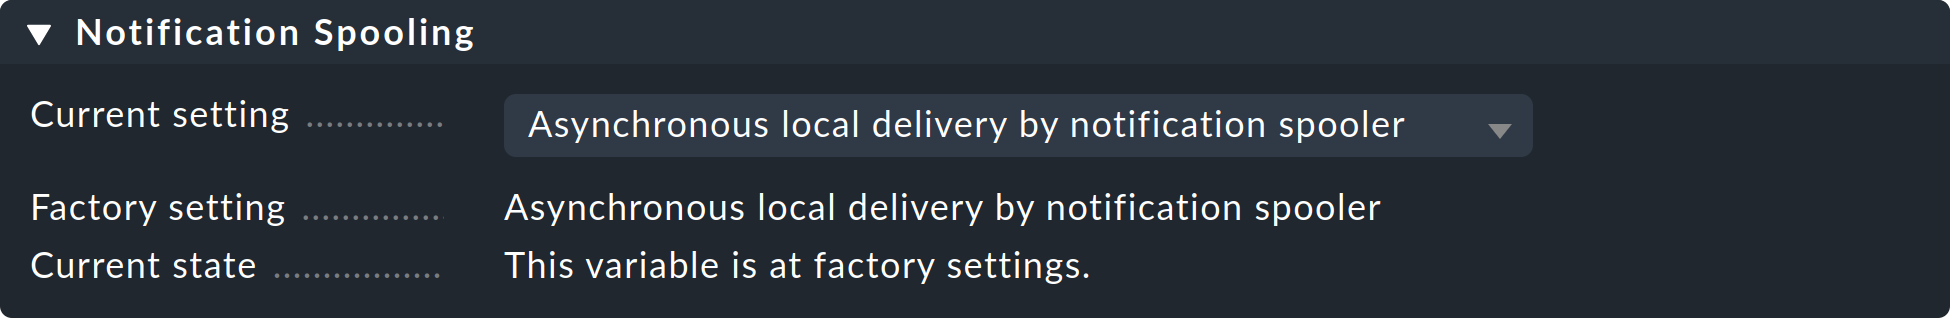 distributed monitoring notification spooling central